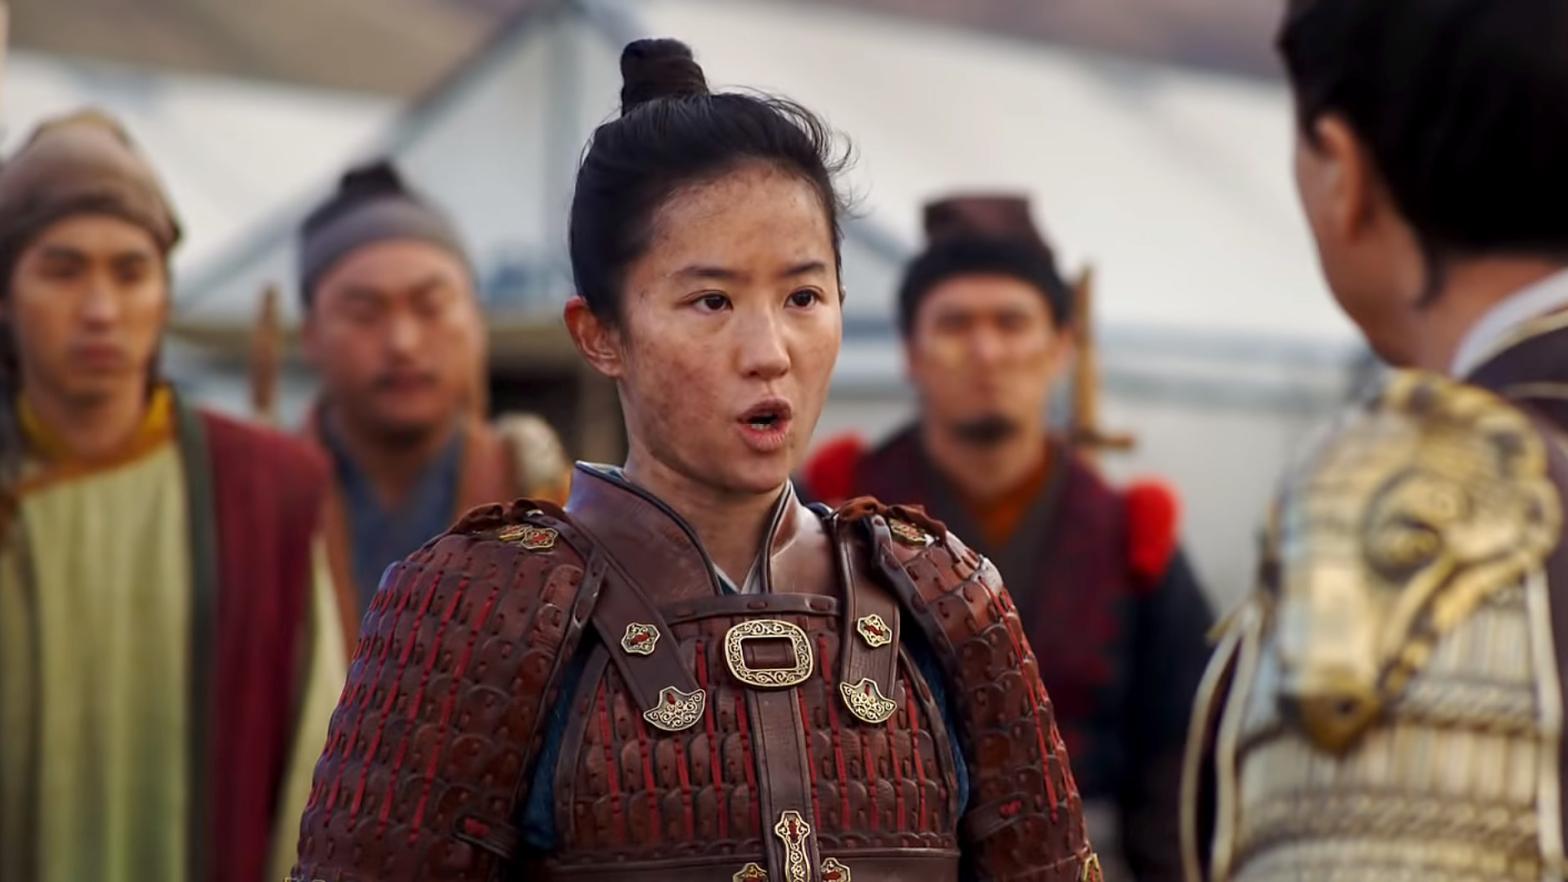 Liu Yifei in a scene from Disney's Mulan live-action remake.  (Image: Disney)